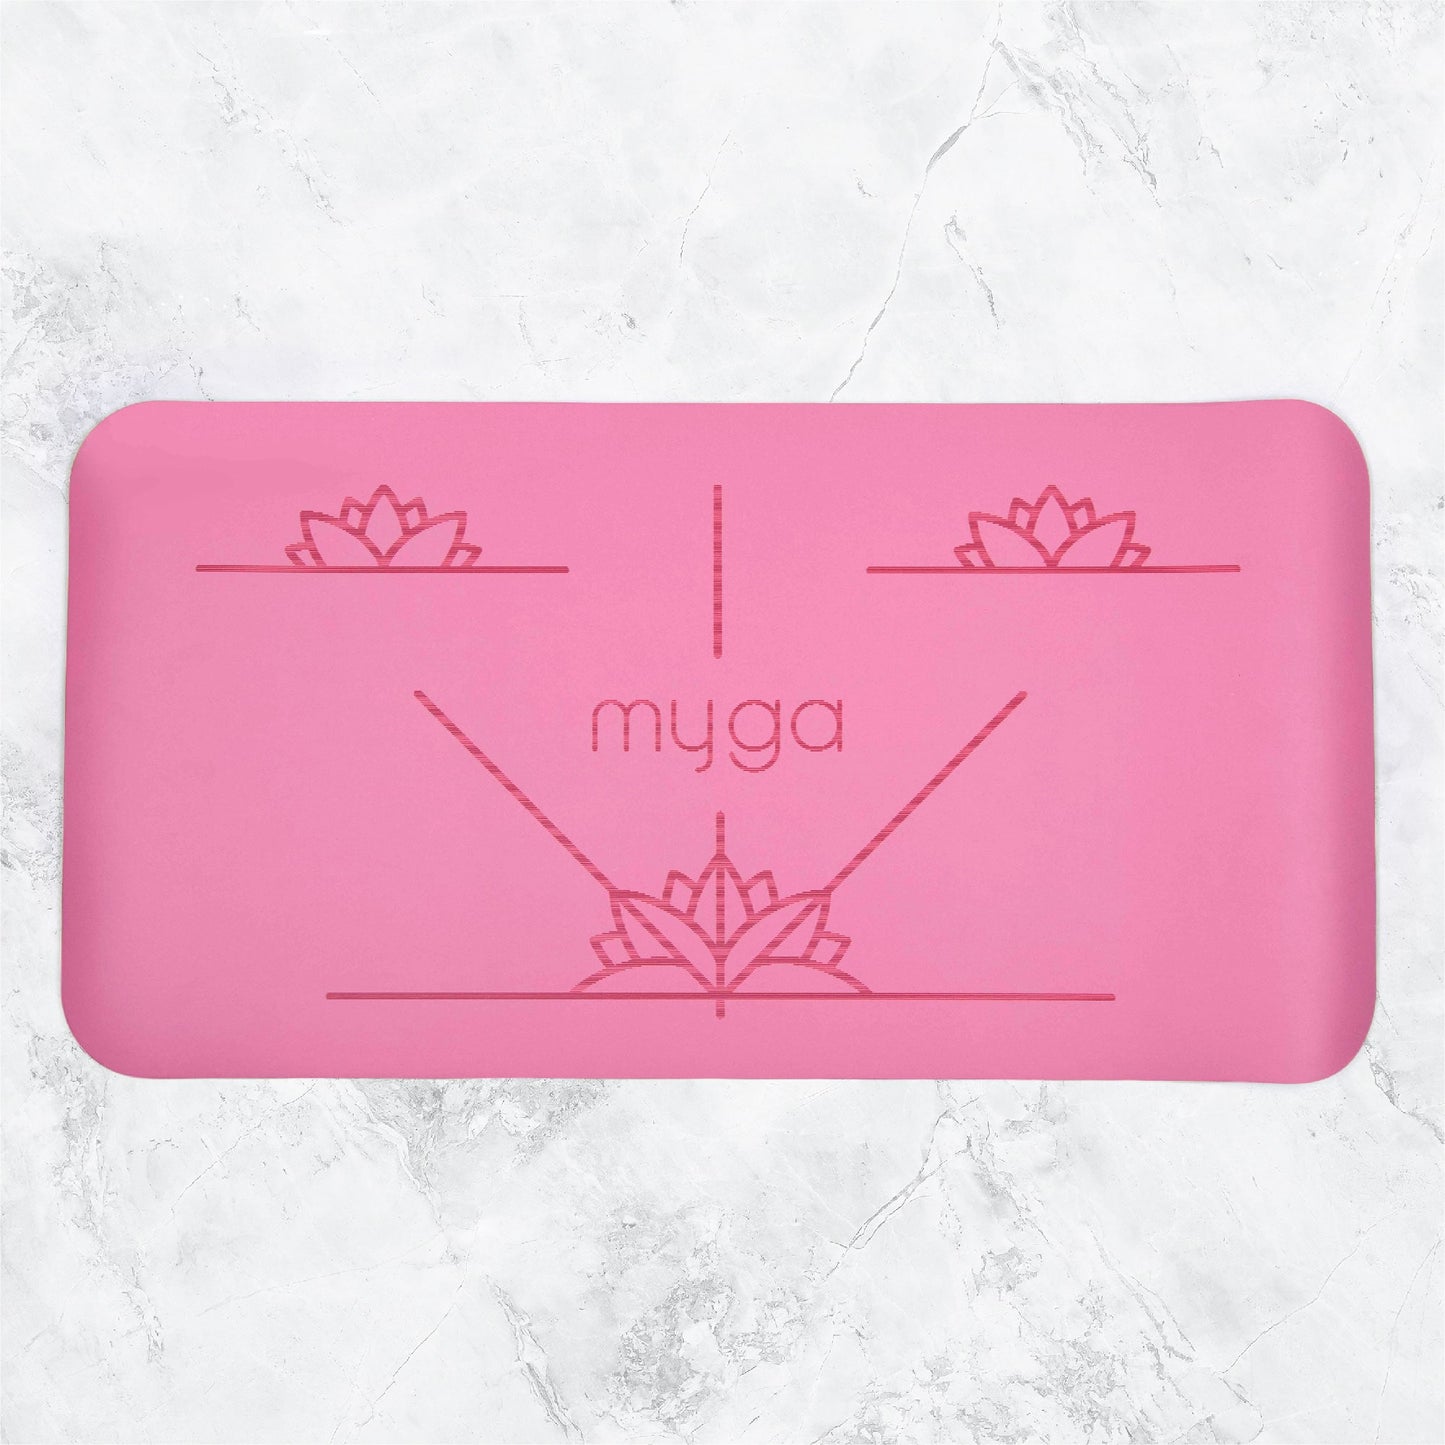 Yoga Support Pad - Pink